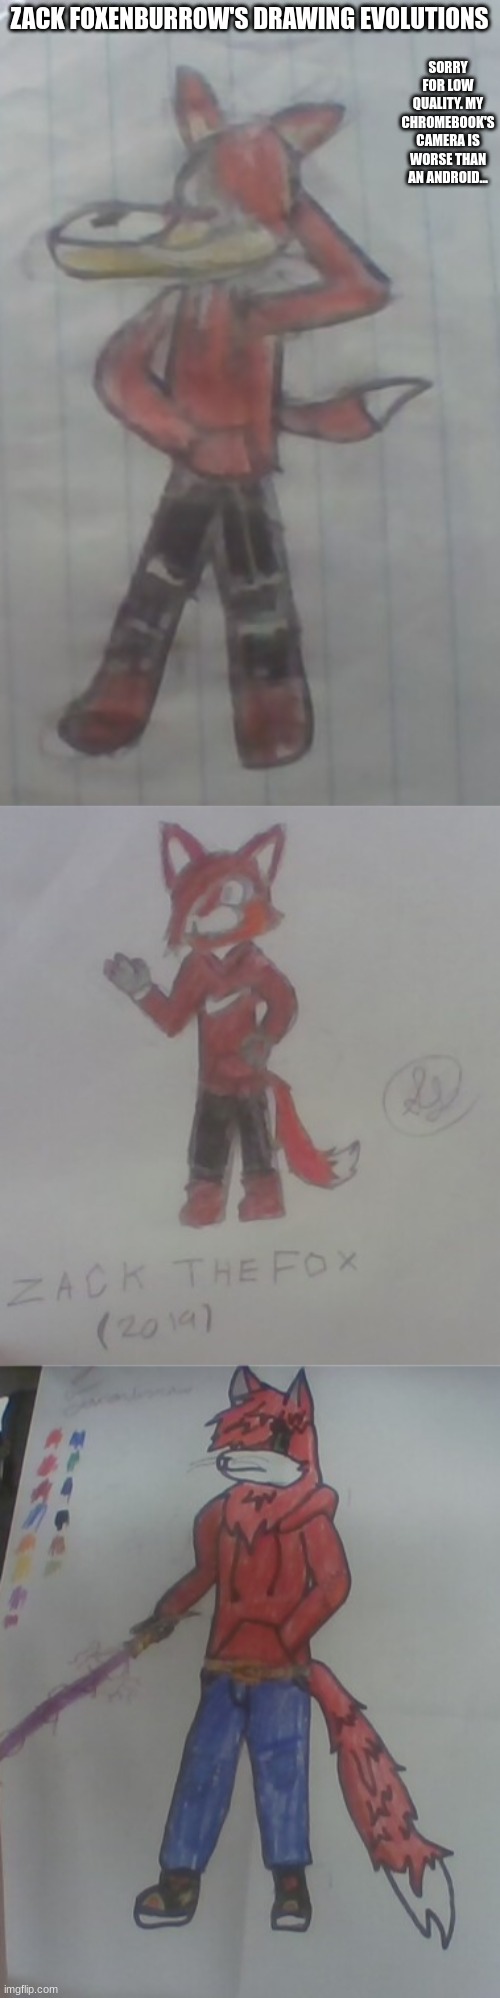 Top is oldest, middle is middle, bottom is most recent (Literally yesterday)... | SORRY FOR LOW QUALITY. MY CHROMEBOOK'S CAMERA IS WORSE THAN AN ANDROID... ZACK FOXENBURROW'S DRAWING EVOLUTIONS | image tagged in zack the fox,zack foxenburrow edit 1,zack foxenburrow edit 2 | made w/ Imgflip meme maker